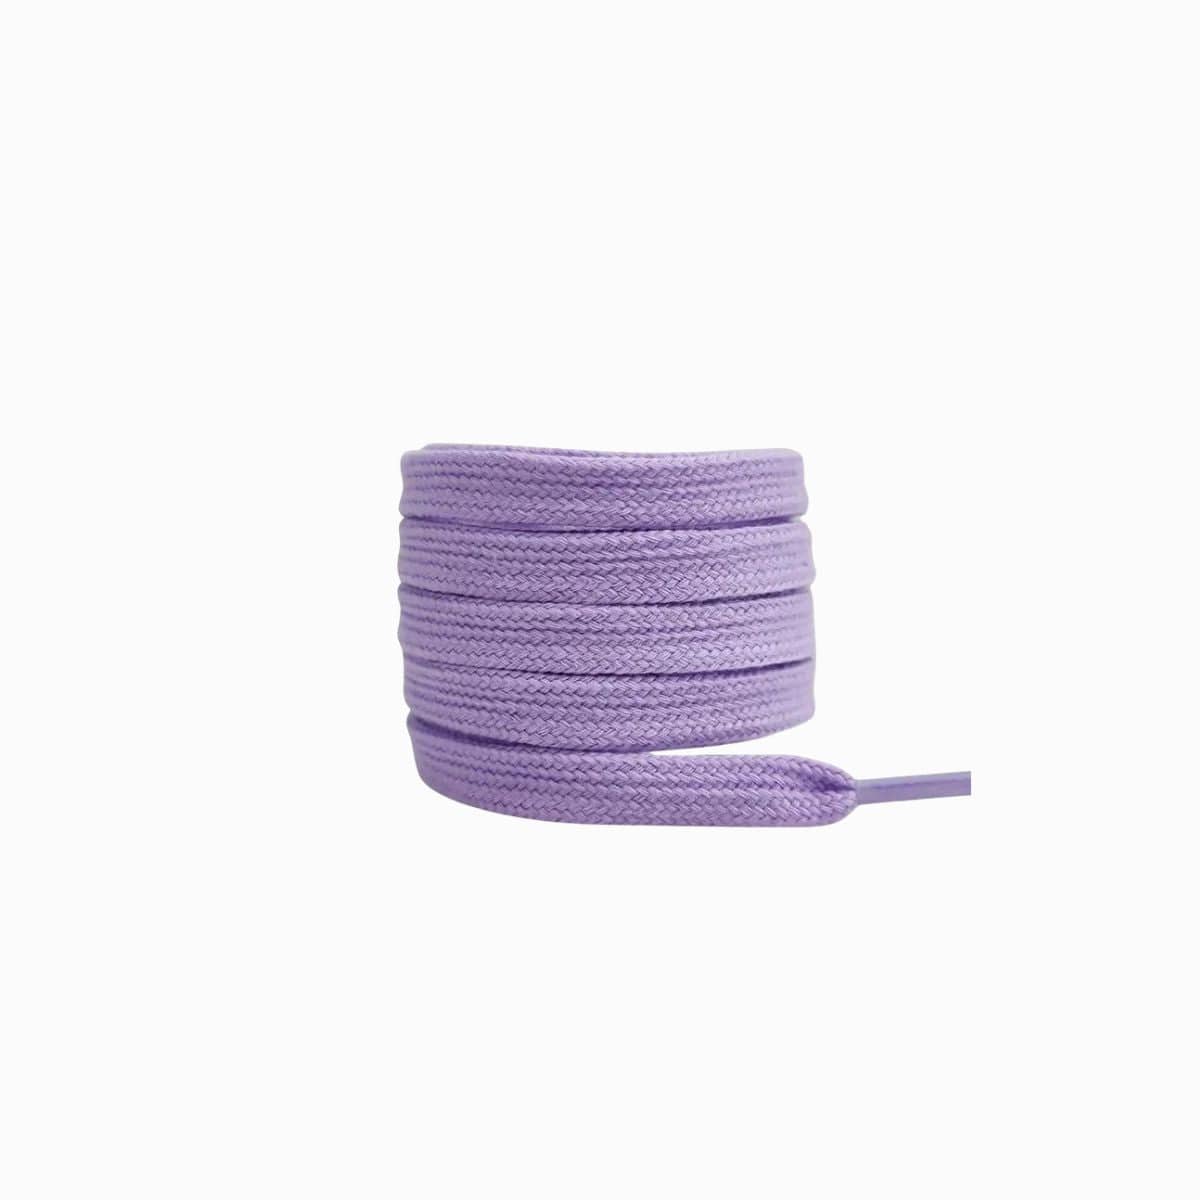 Light Purple Replacement Adidas Shoe Laces for Adidas Gazelle Sneakers by Kicks Shoelaces